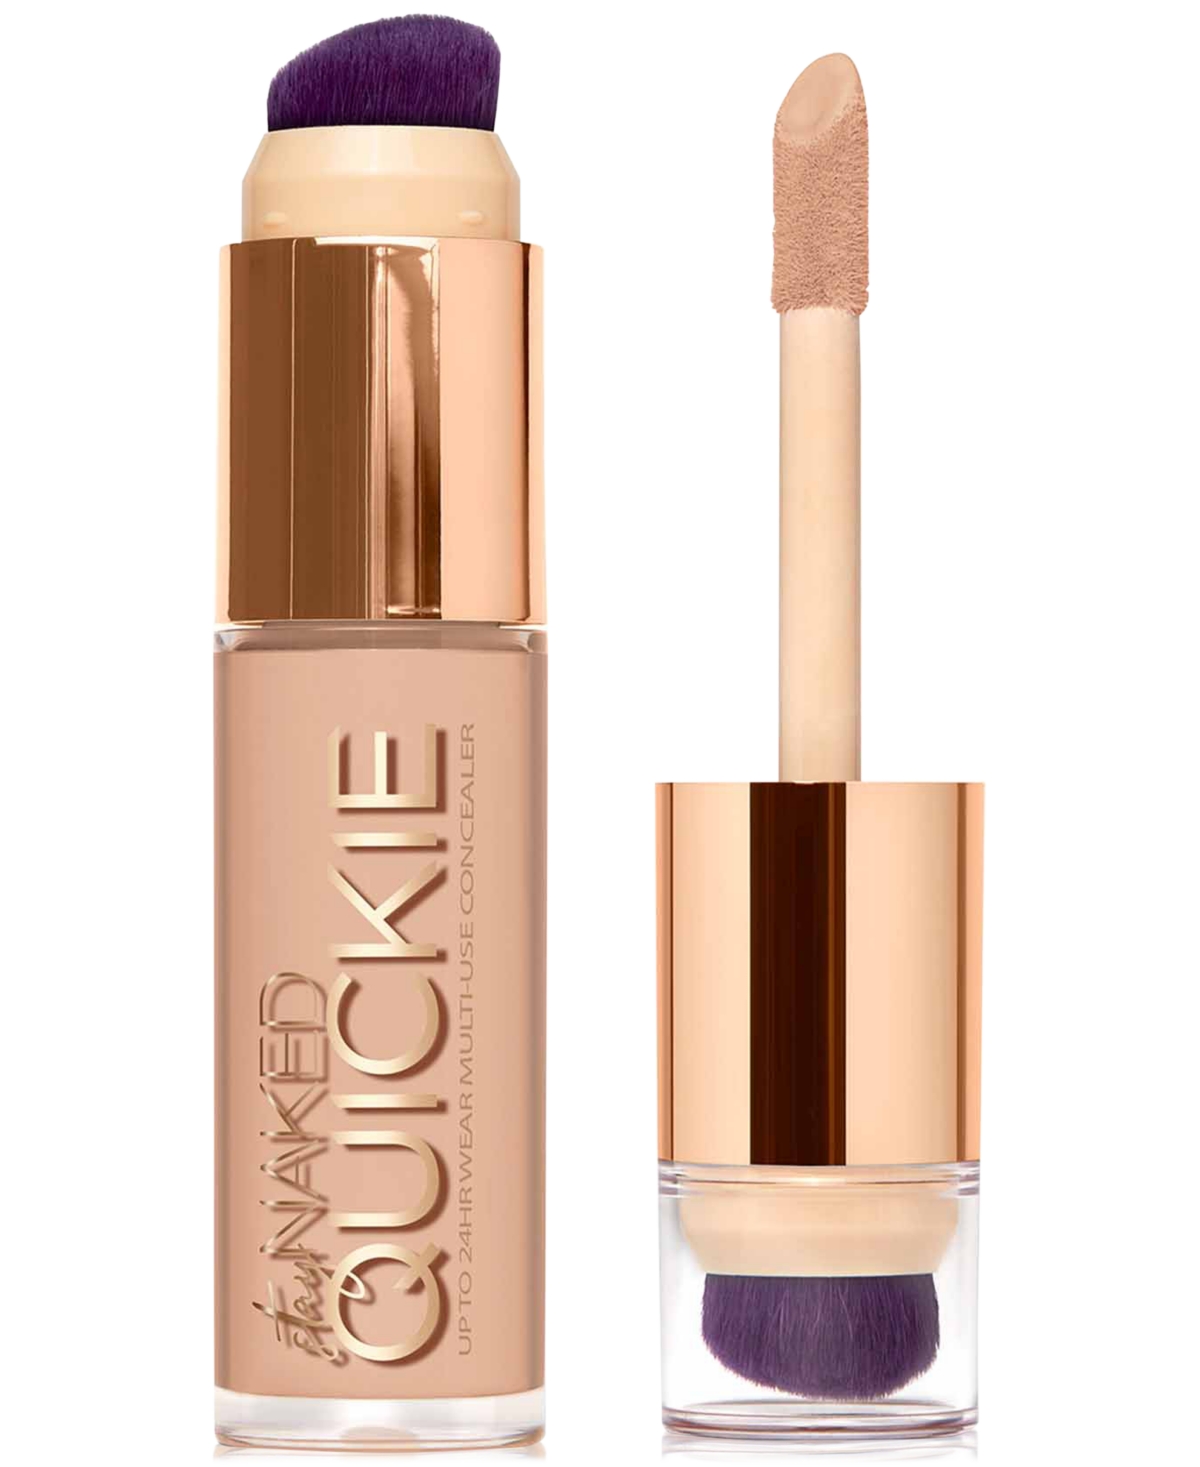 Urban Decay Quickie 24h Multi-use Hydrating Full Coverage Concealer, 0.55 Oz. In Wo (light Medium Warm Orange)